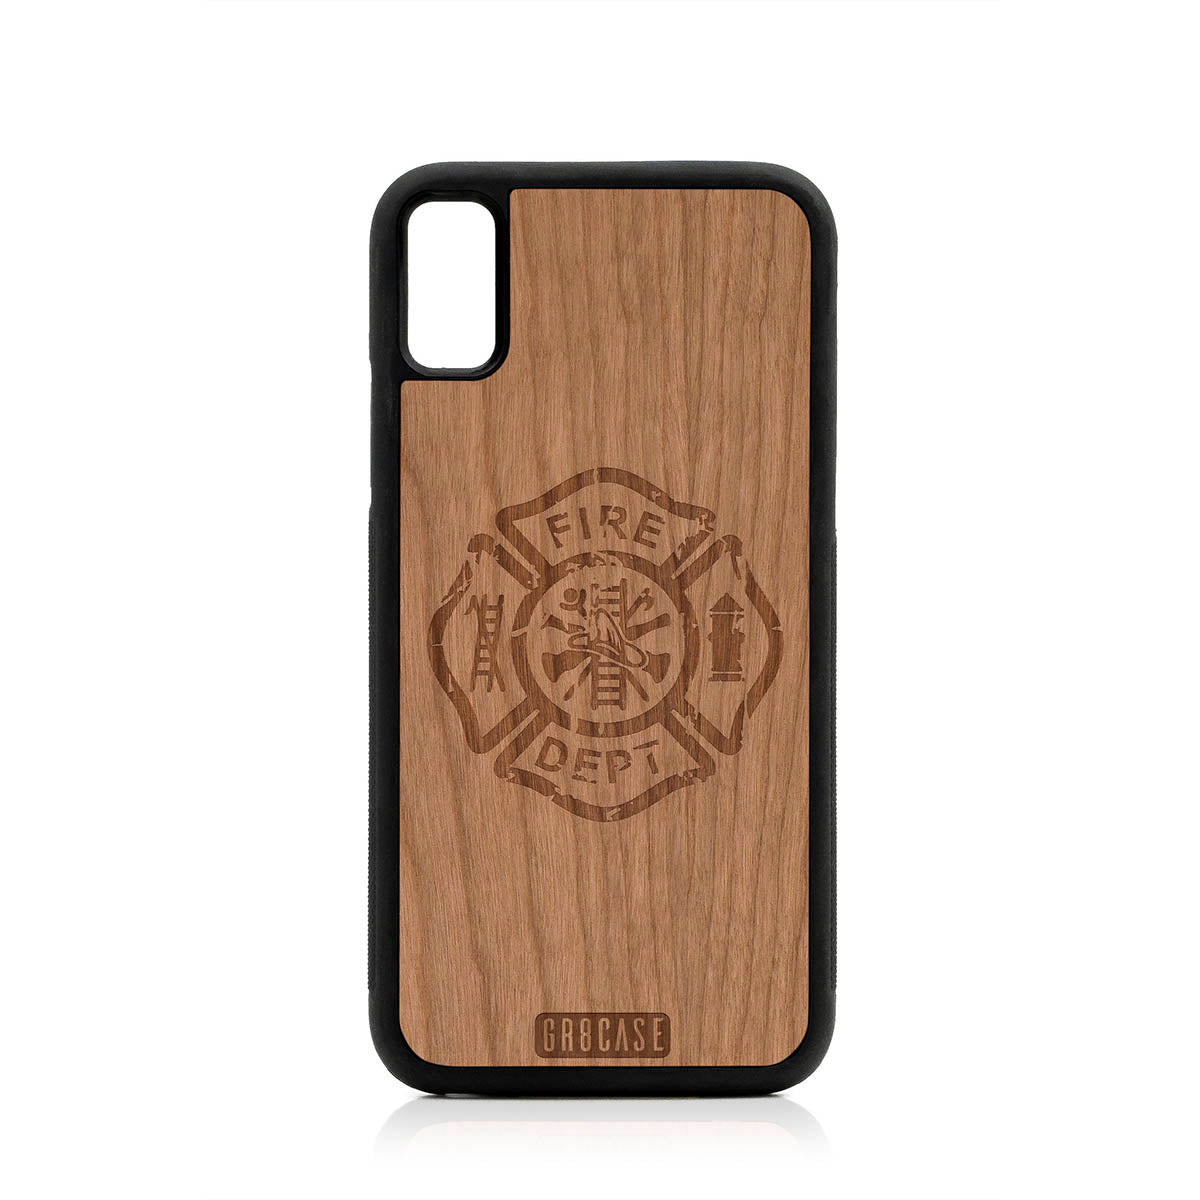 Fire Department Design Wood Case For iPhone XS Max by GR8CASE